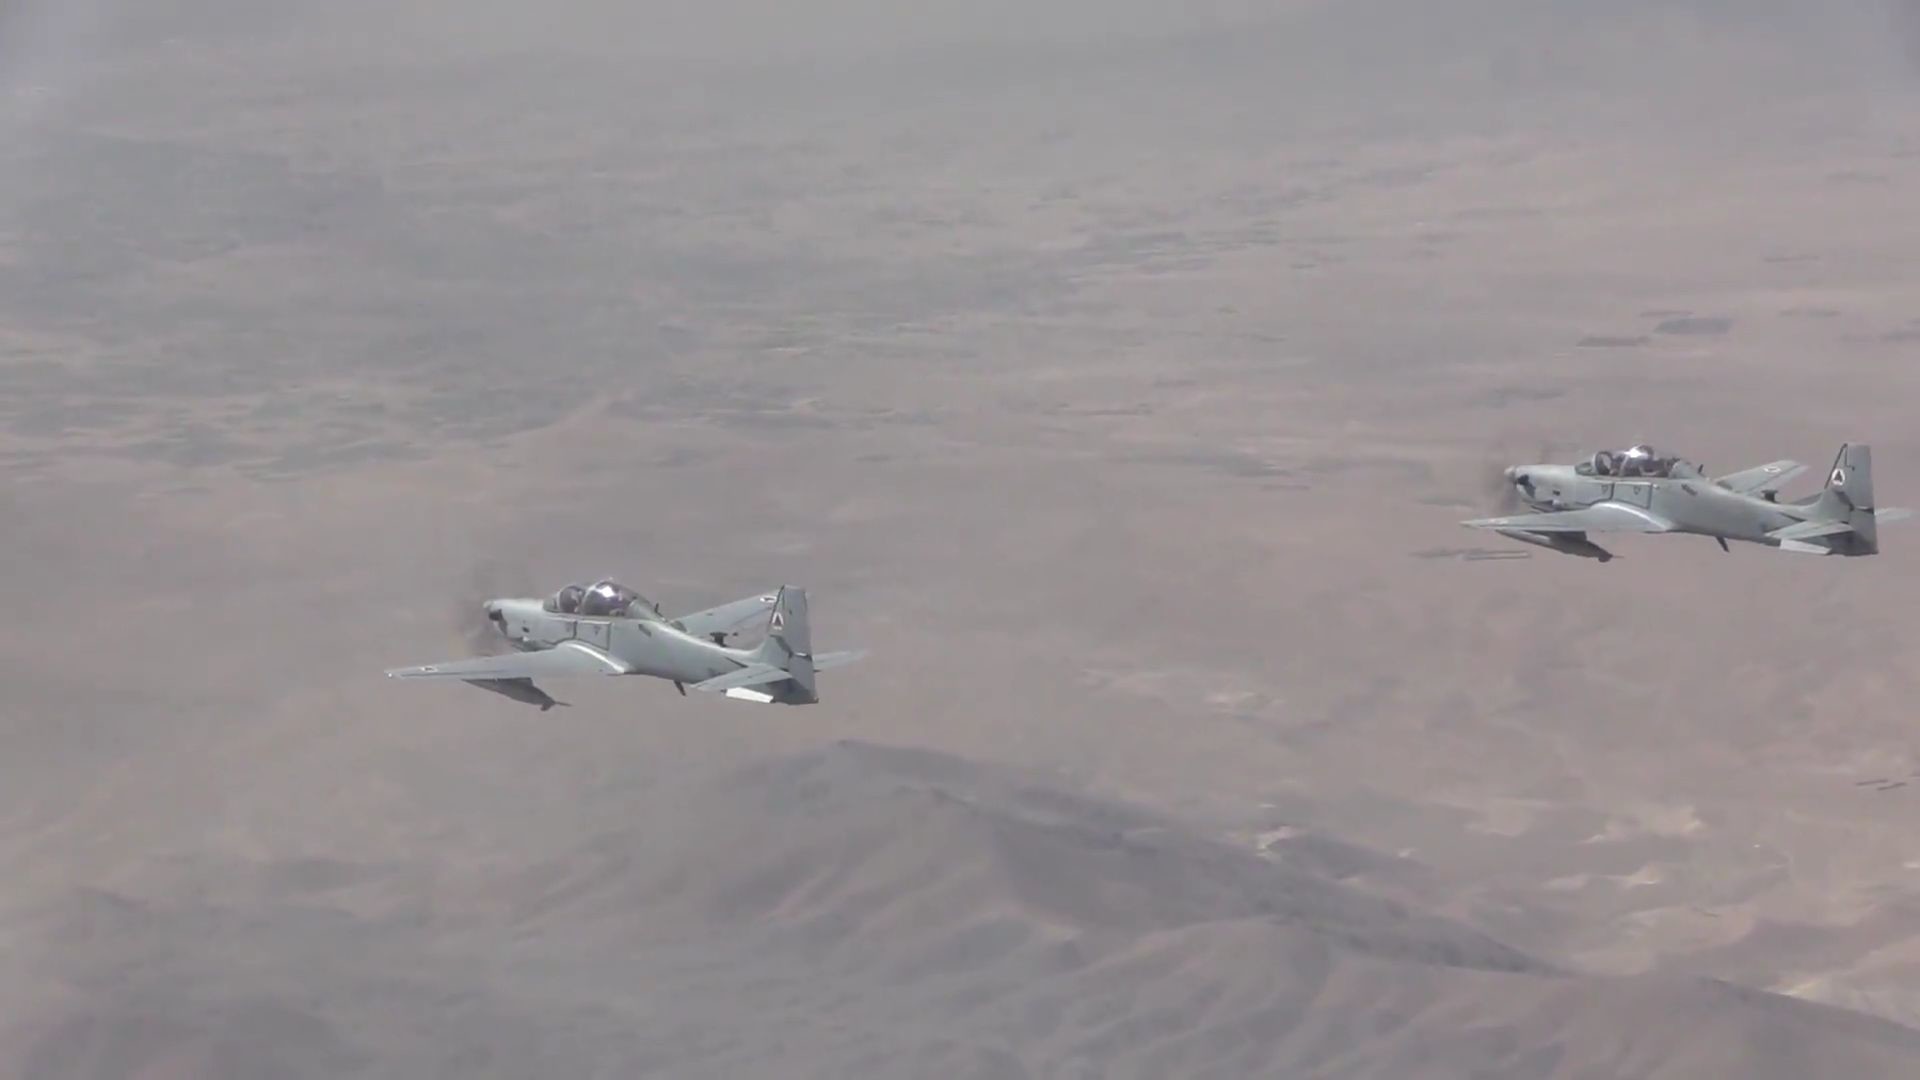 A-29 training mission in Afghanistan